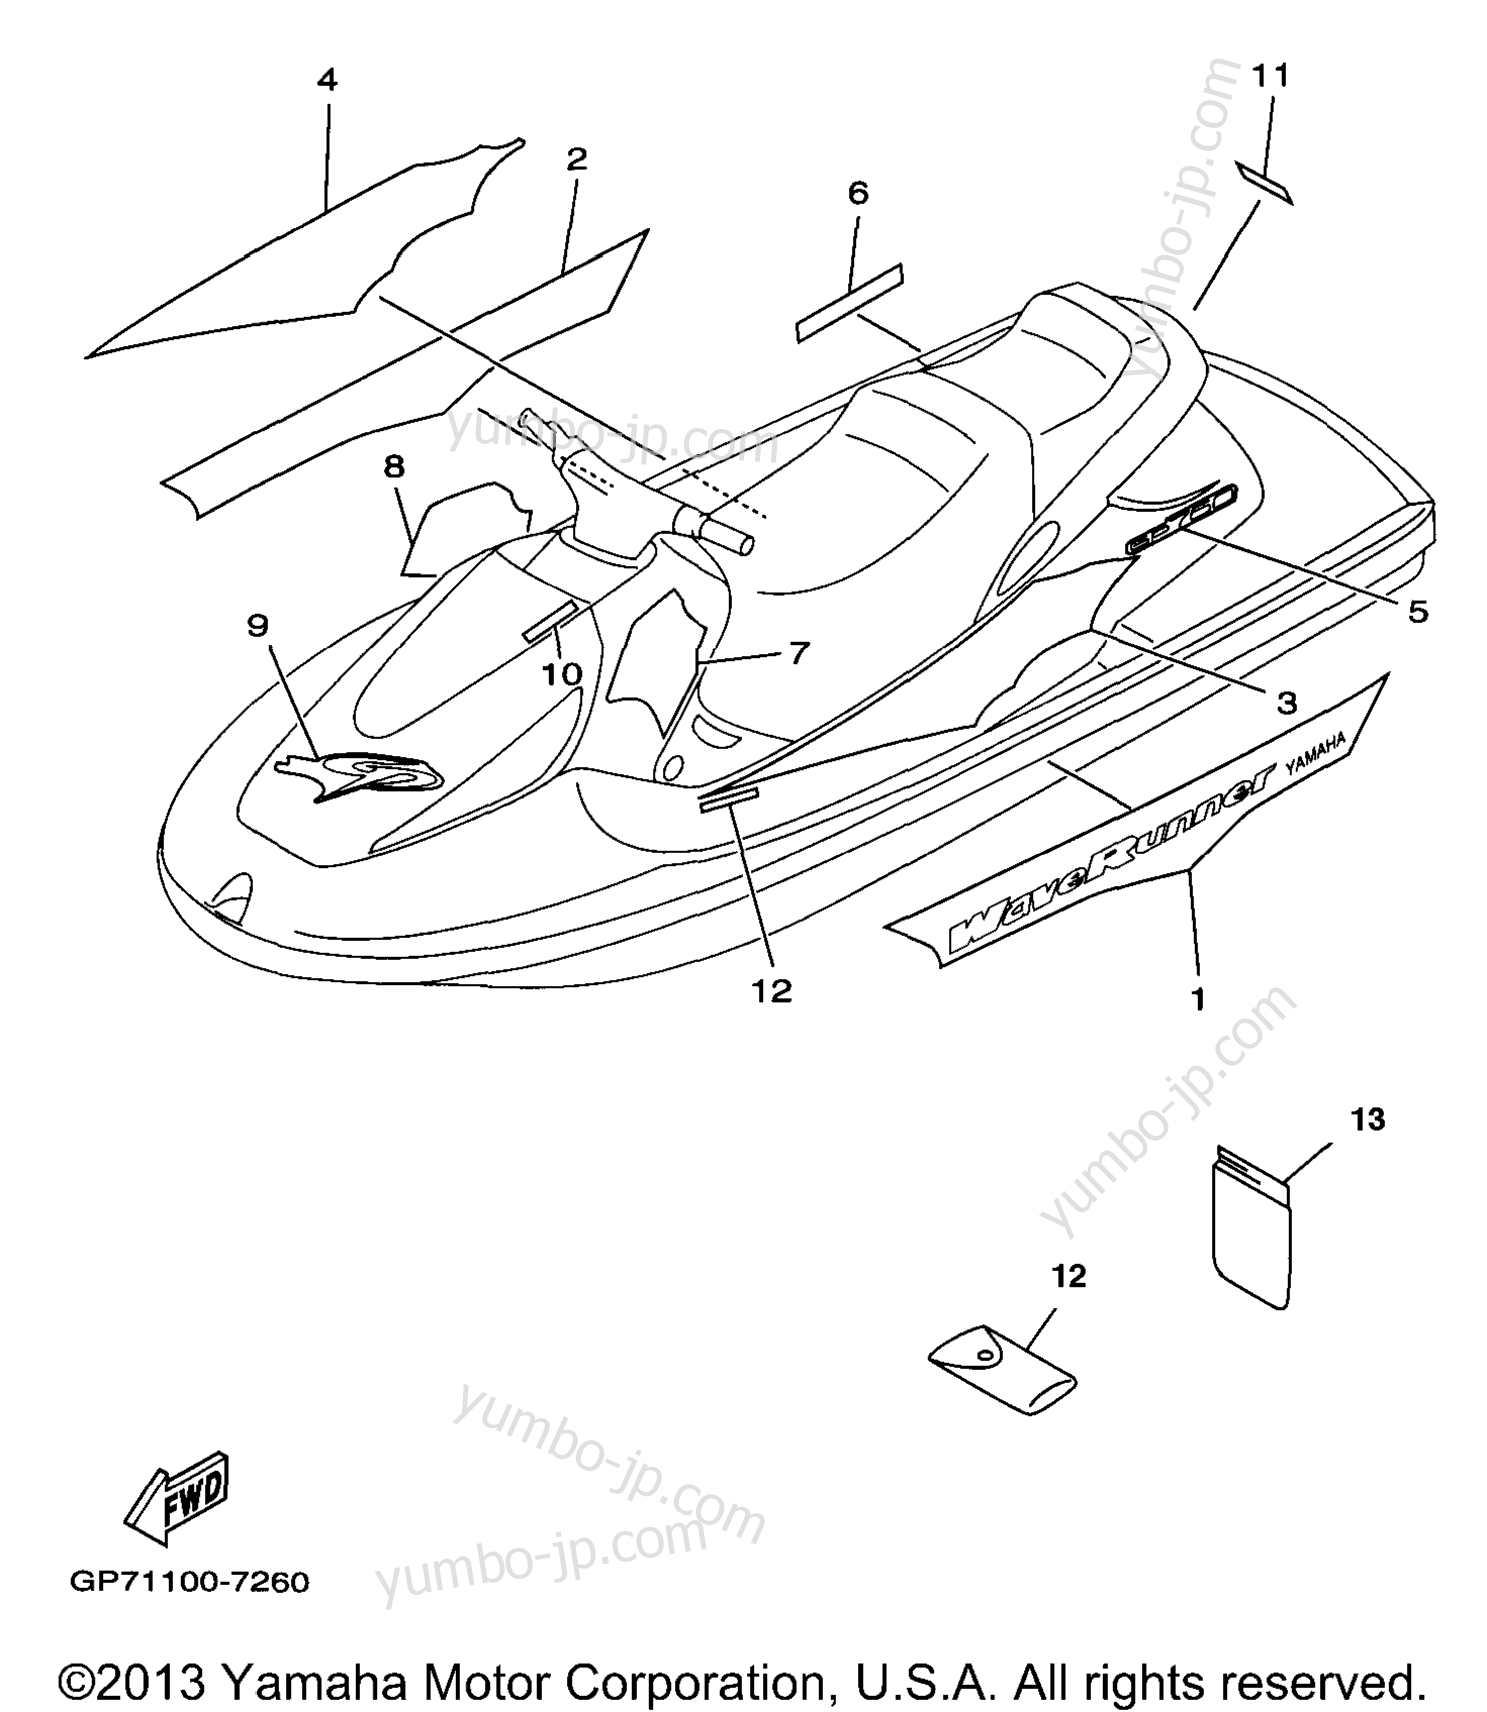 Graphic Tool for watercrafts YAMAHA WAVE RUNNER GP760 (GP760V) 1997 year